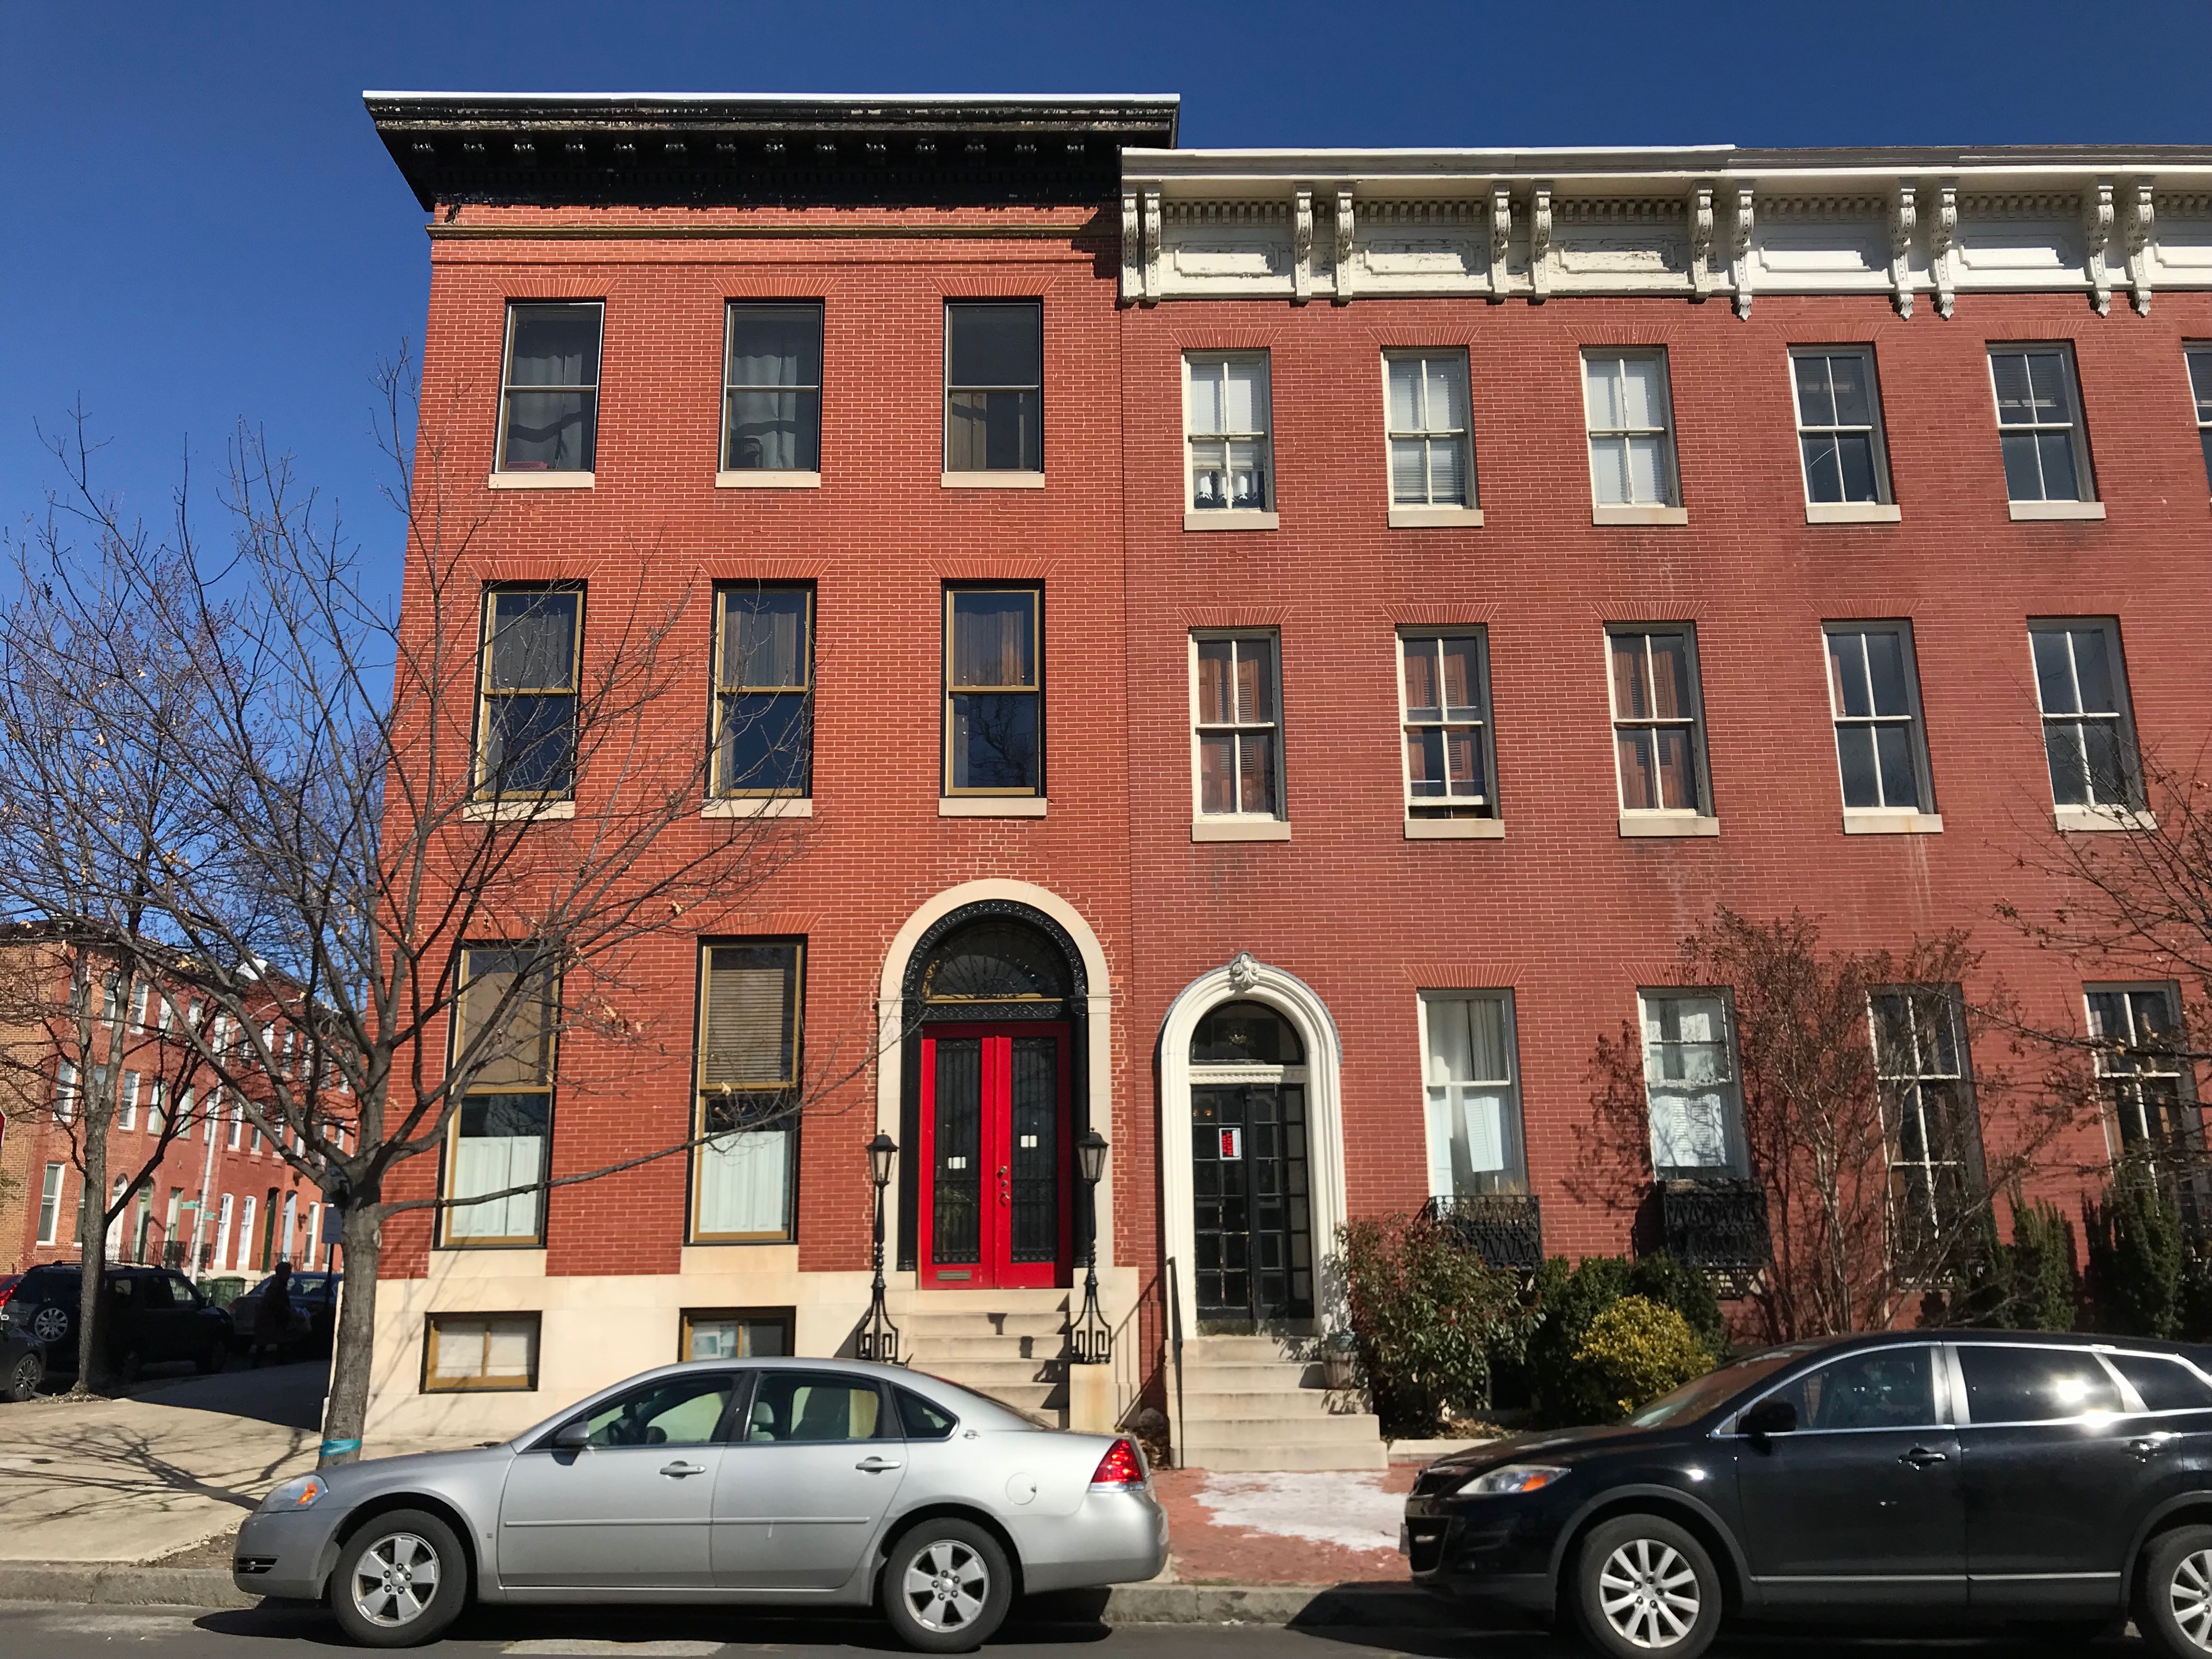 Rowhouse, 5 S. Gilmor Street, Baltimore, MD 21223, Baltimore, Building, Car, Hollins Street, HQ Photo